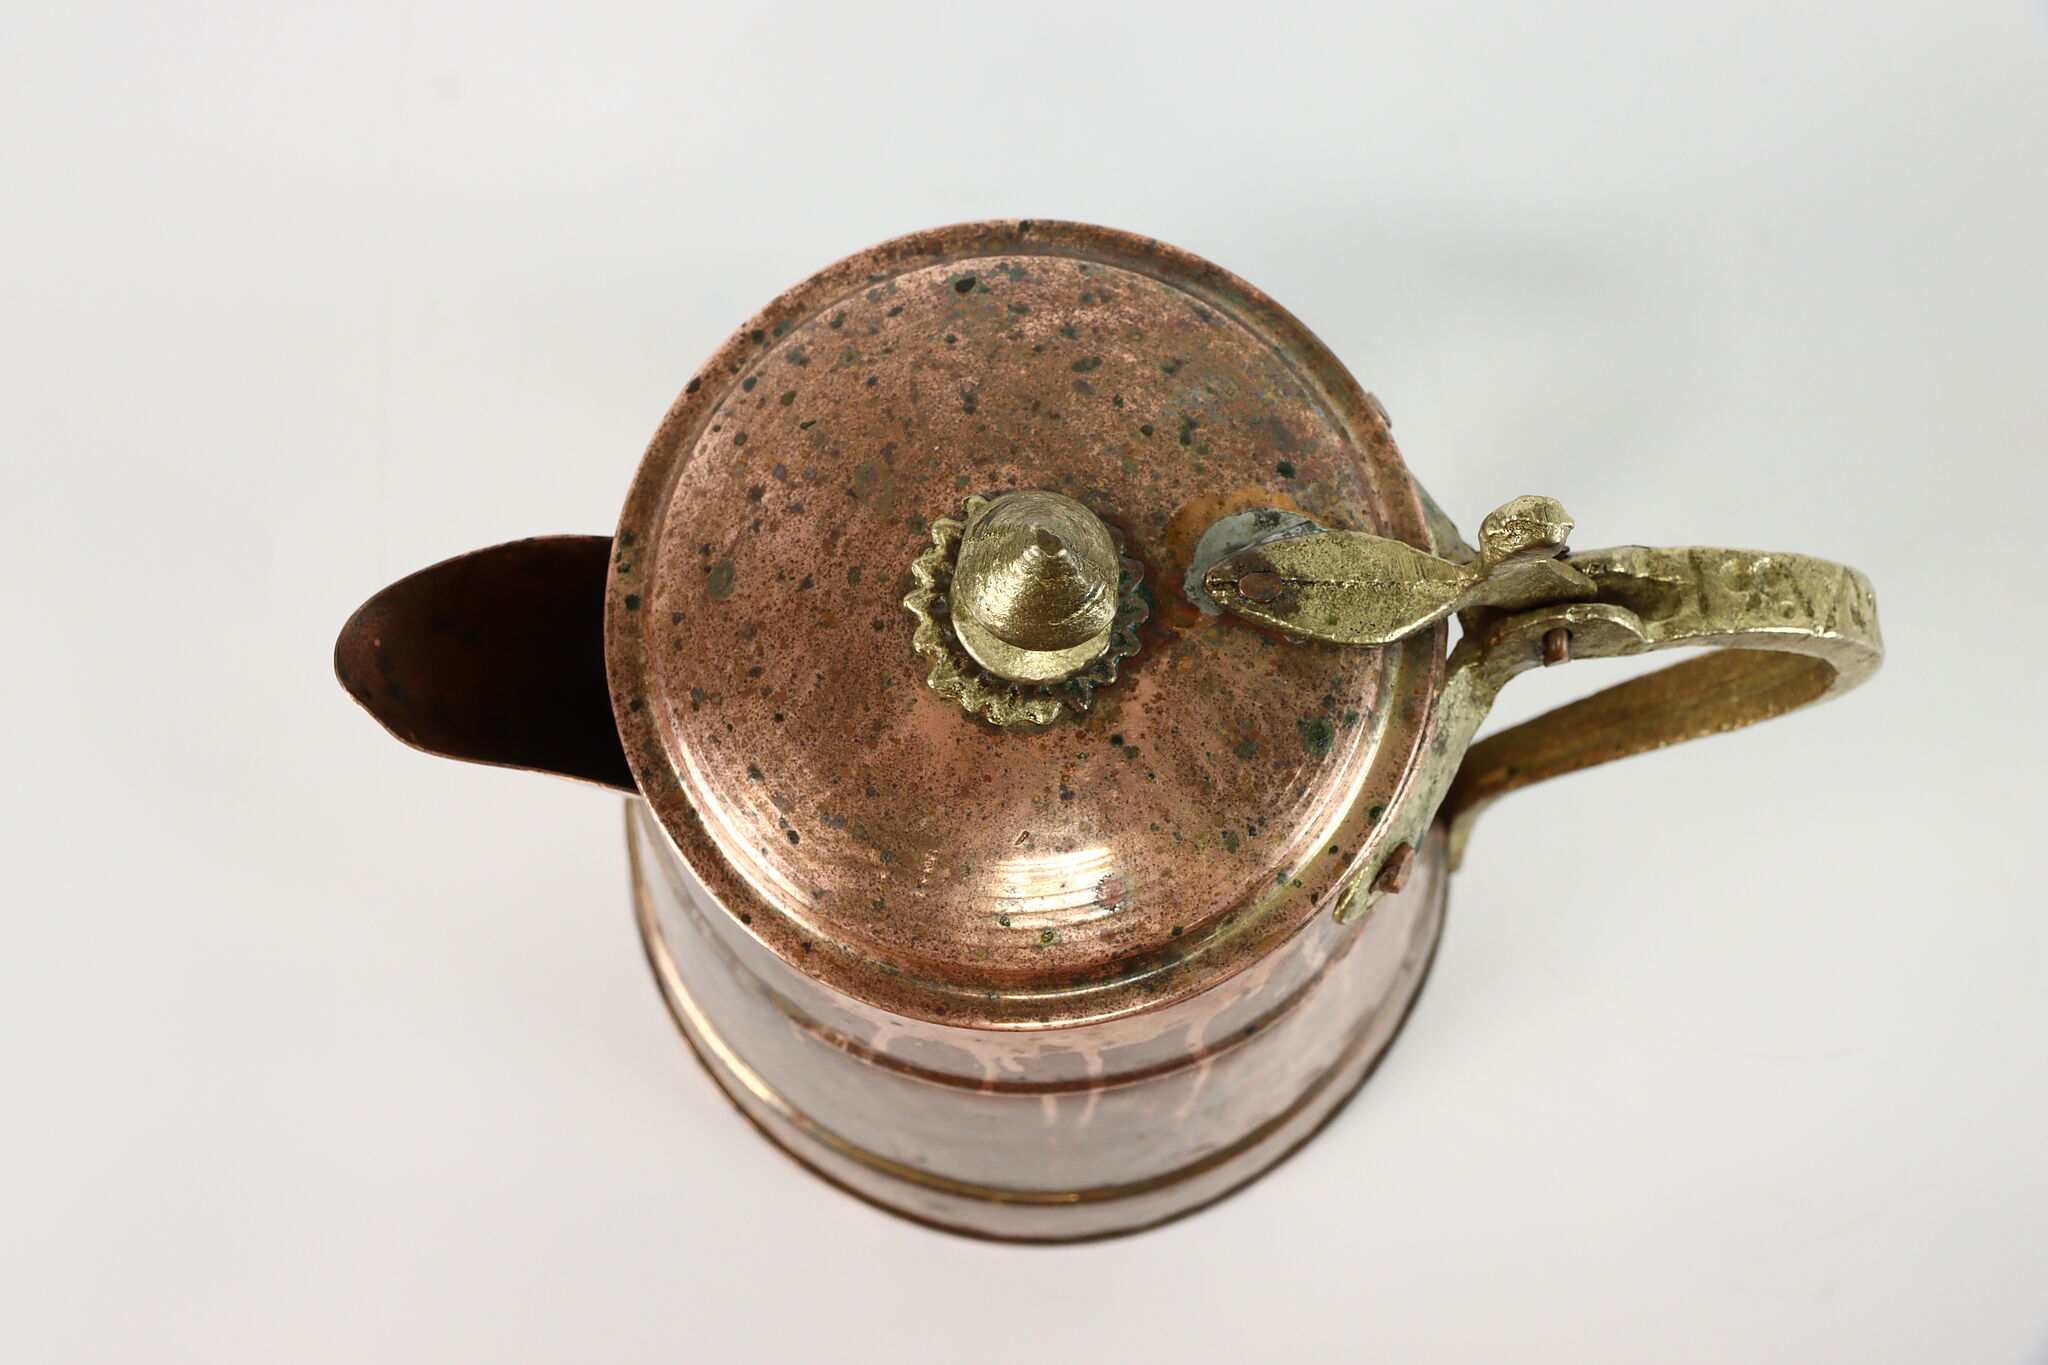 Copper & Brass Antique Hammered Farmhouse Coffee Pot